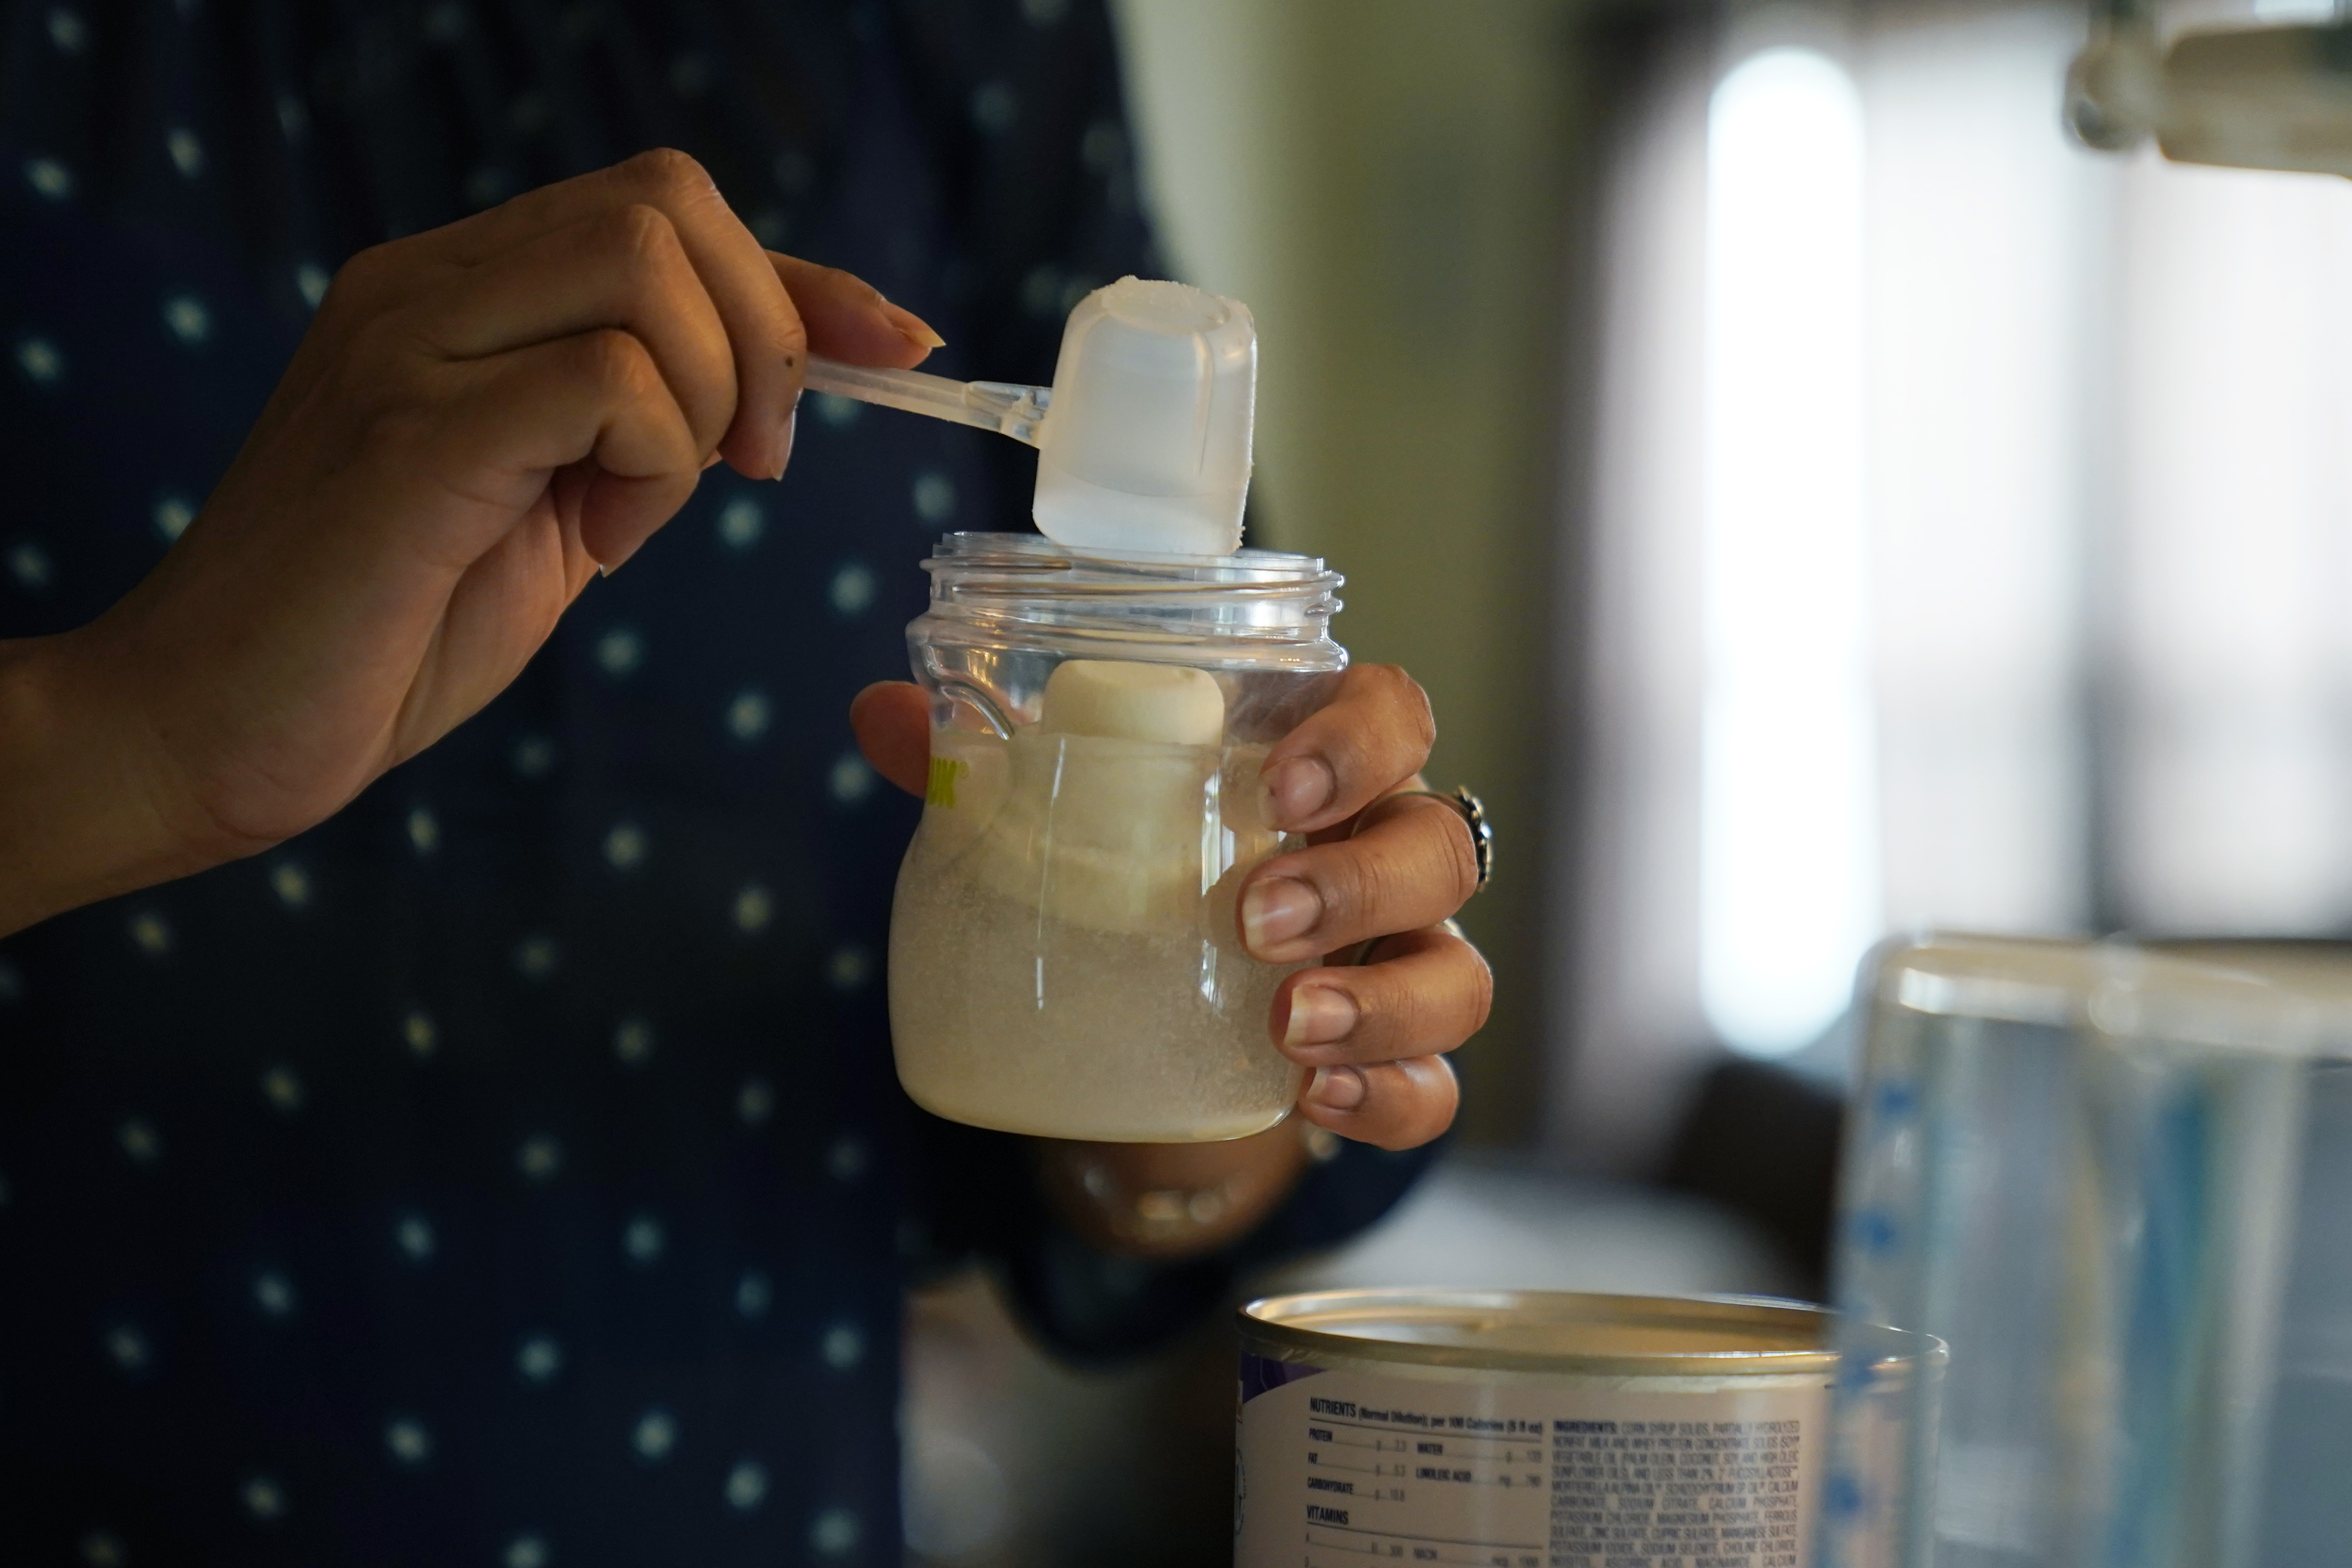 Olivia Godden prepares a bottle of baby formula for her infant son, Jaiden, Friday, May 13, 2022, at her home in San Antonio. Godden has reached out to family and friends as well as other moms through social media in efforts to locate needed baby formula which is in short supply. (AP Photo/Eric Gay)